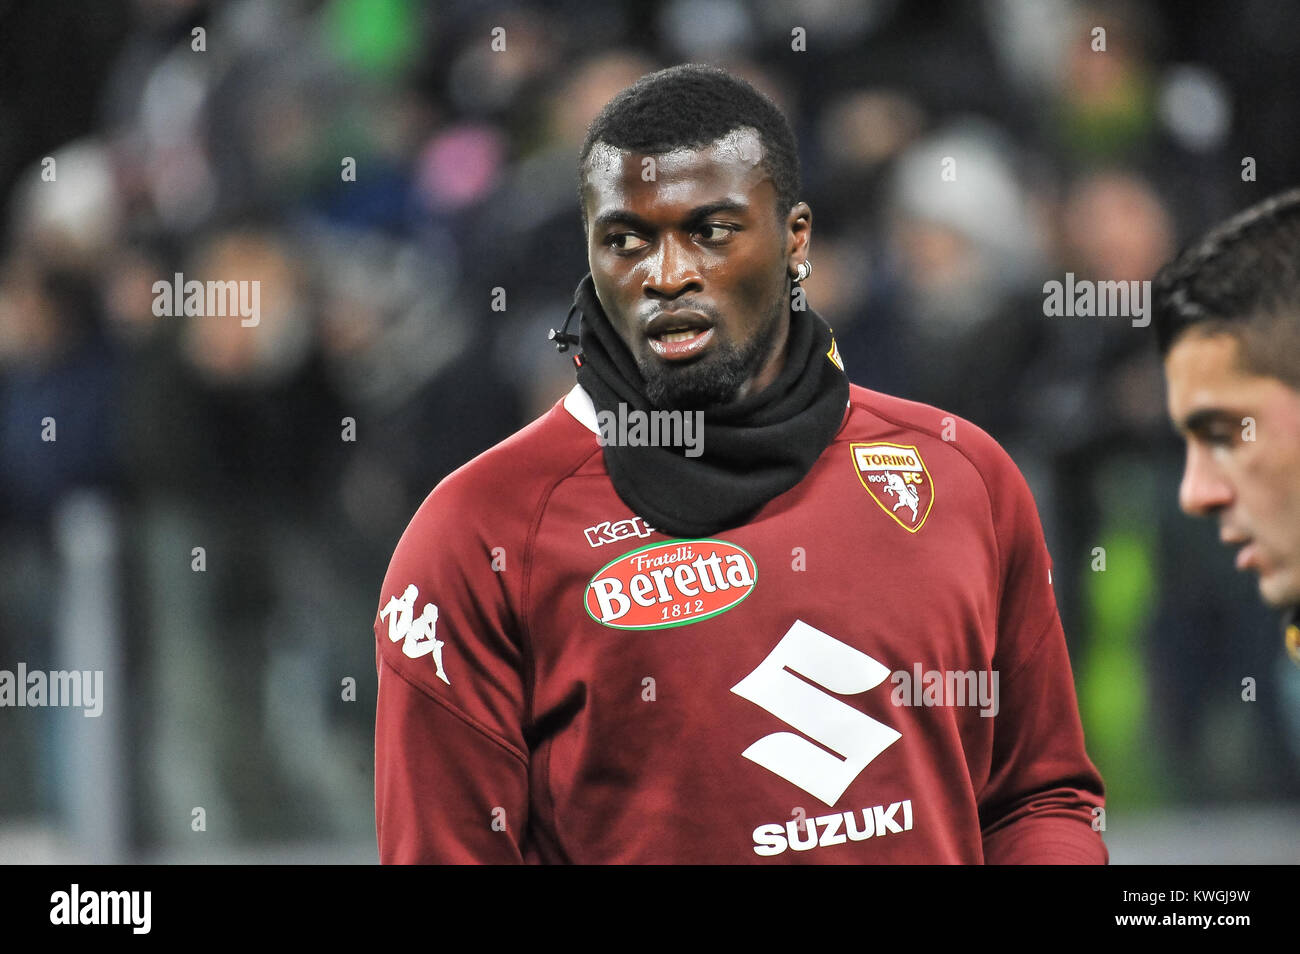 Turin, Italy. 3rd Jan, 2018. M'Baye Niang (Torino FC) during the Serie A football match between Juventus FC and Torino FC at Allianz Stadium on 3 January, 2018 in Turin, Italy. Credit: FABIO PETROSINO/Alamy Live News Stock Photo